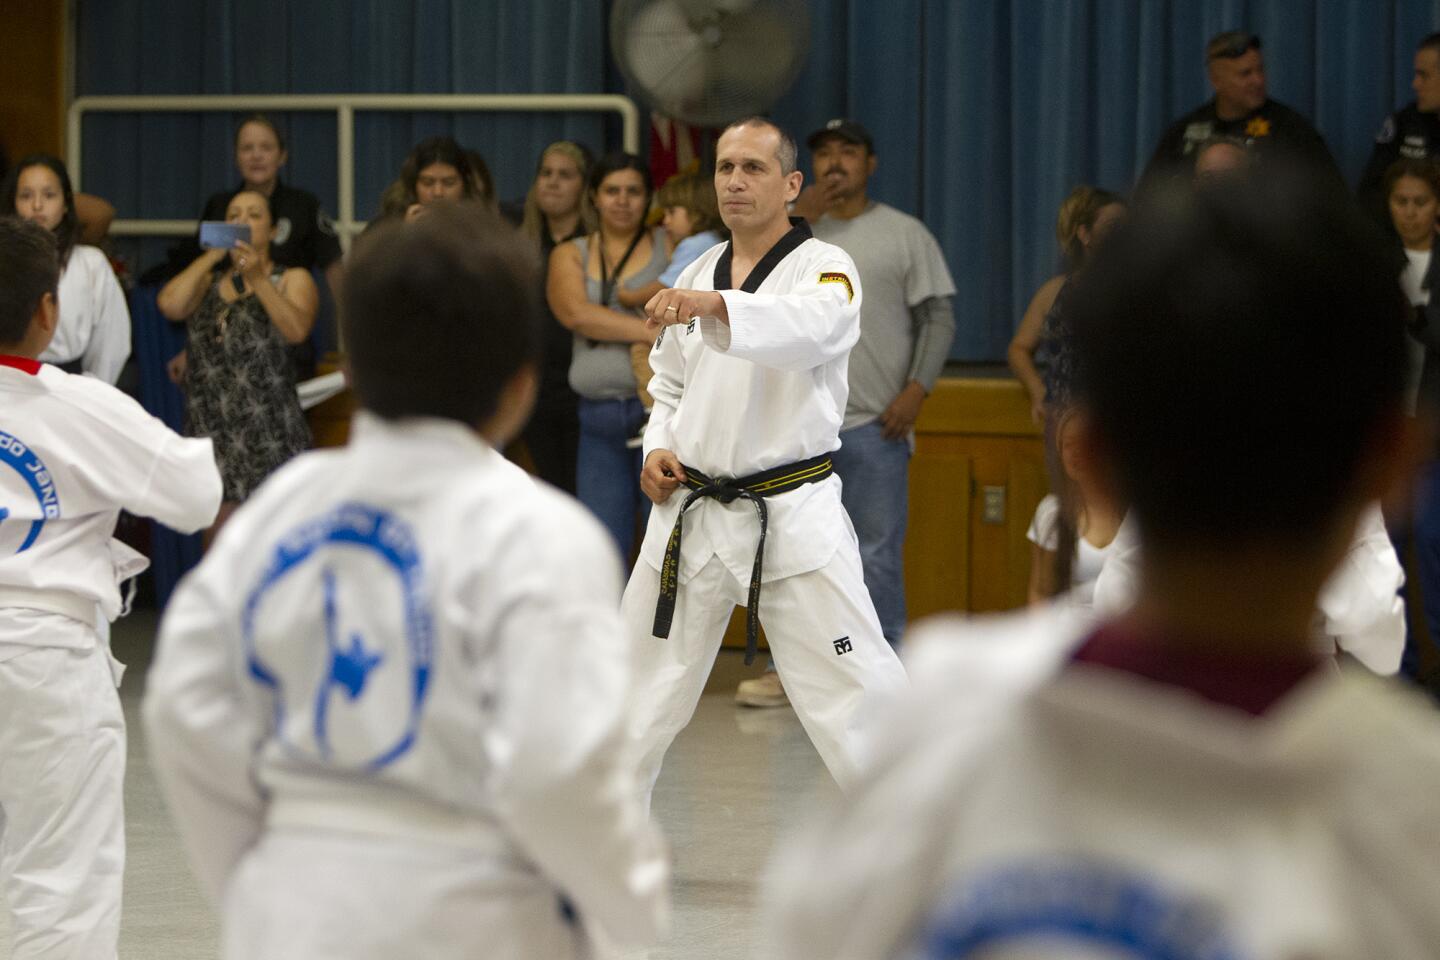 Master Sergio Cardenas, with Taekwondodojang in San Juan Capistrano, leads a group of teenagers in an exercise during a taekwondo summer camp at Wilson Elementary School in Costa Mesa on Tuesday, July 23. The event was hosted by the Orange County Gang Reduction Partnership (OC GRIP).